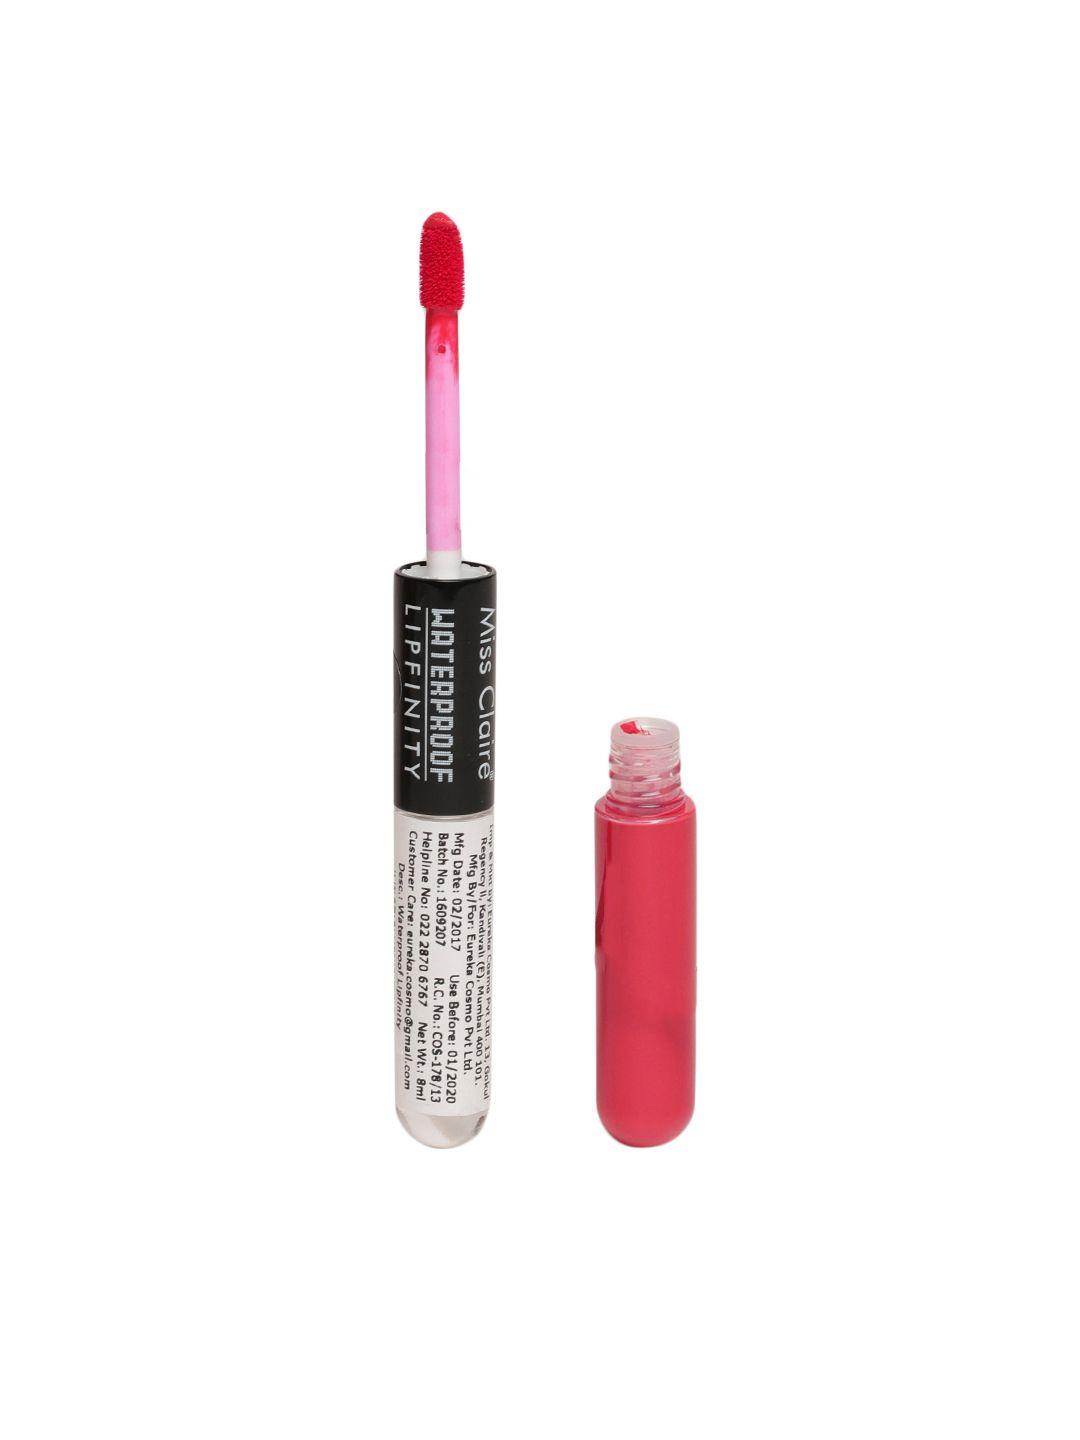 miss-claire-5-colorstay-full-time-lipcolor-10ml